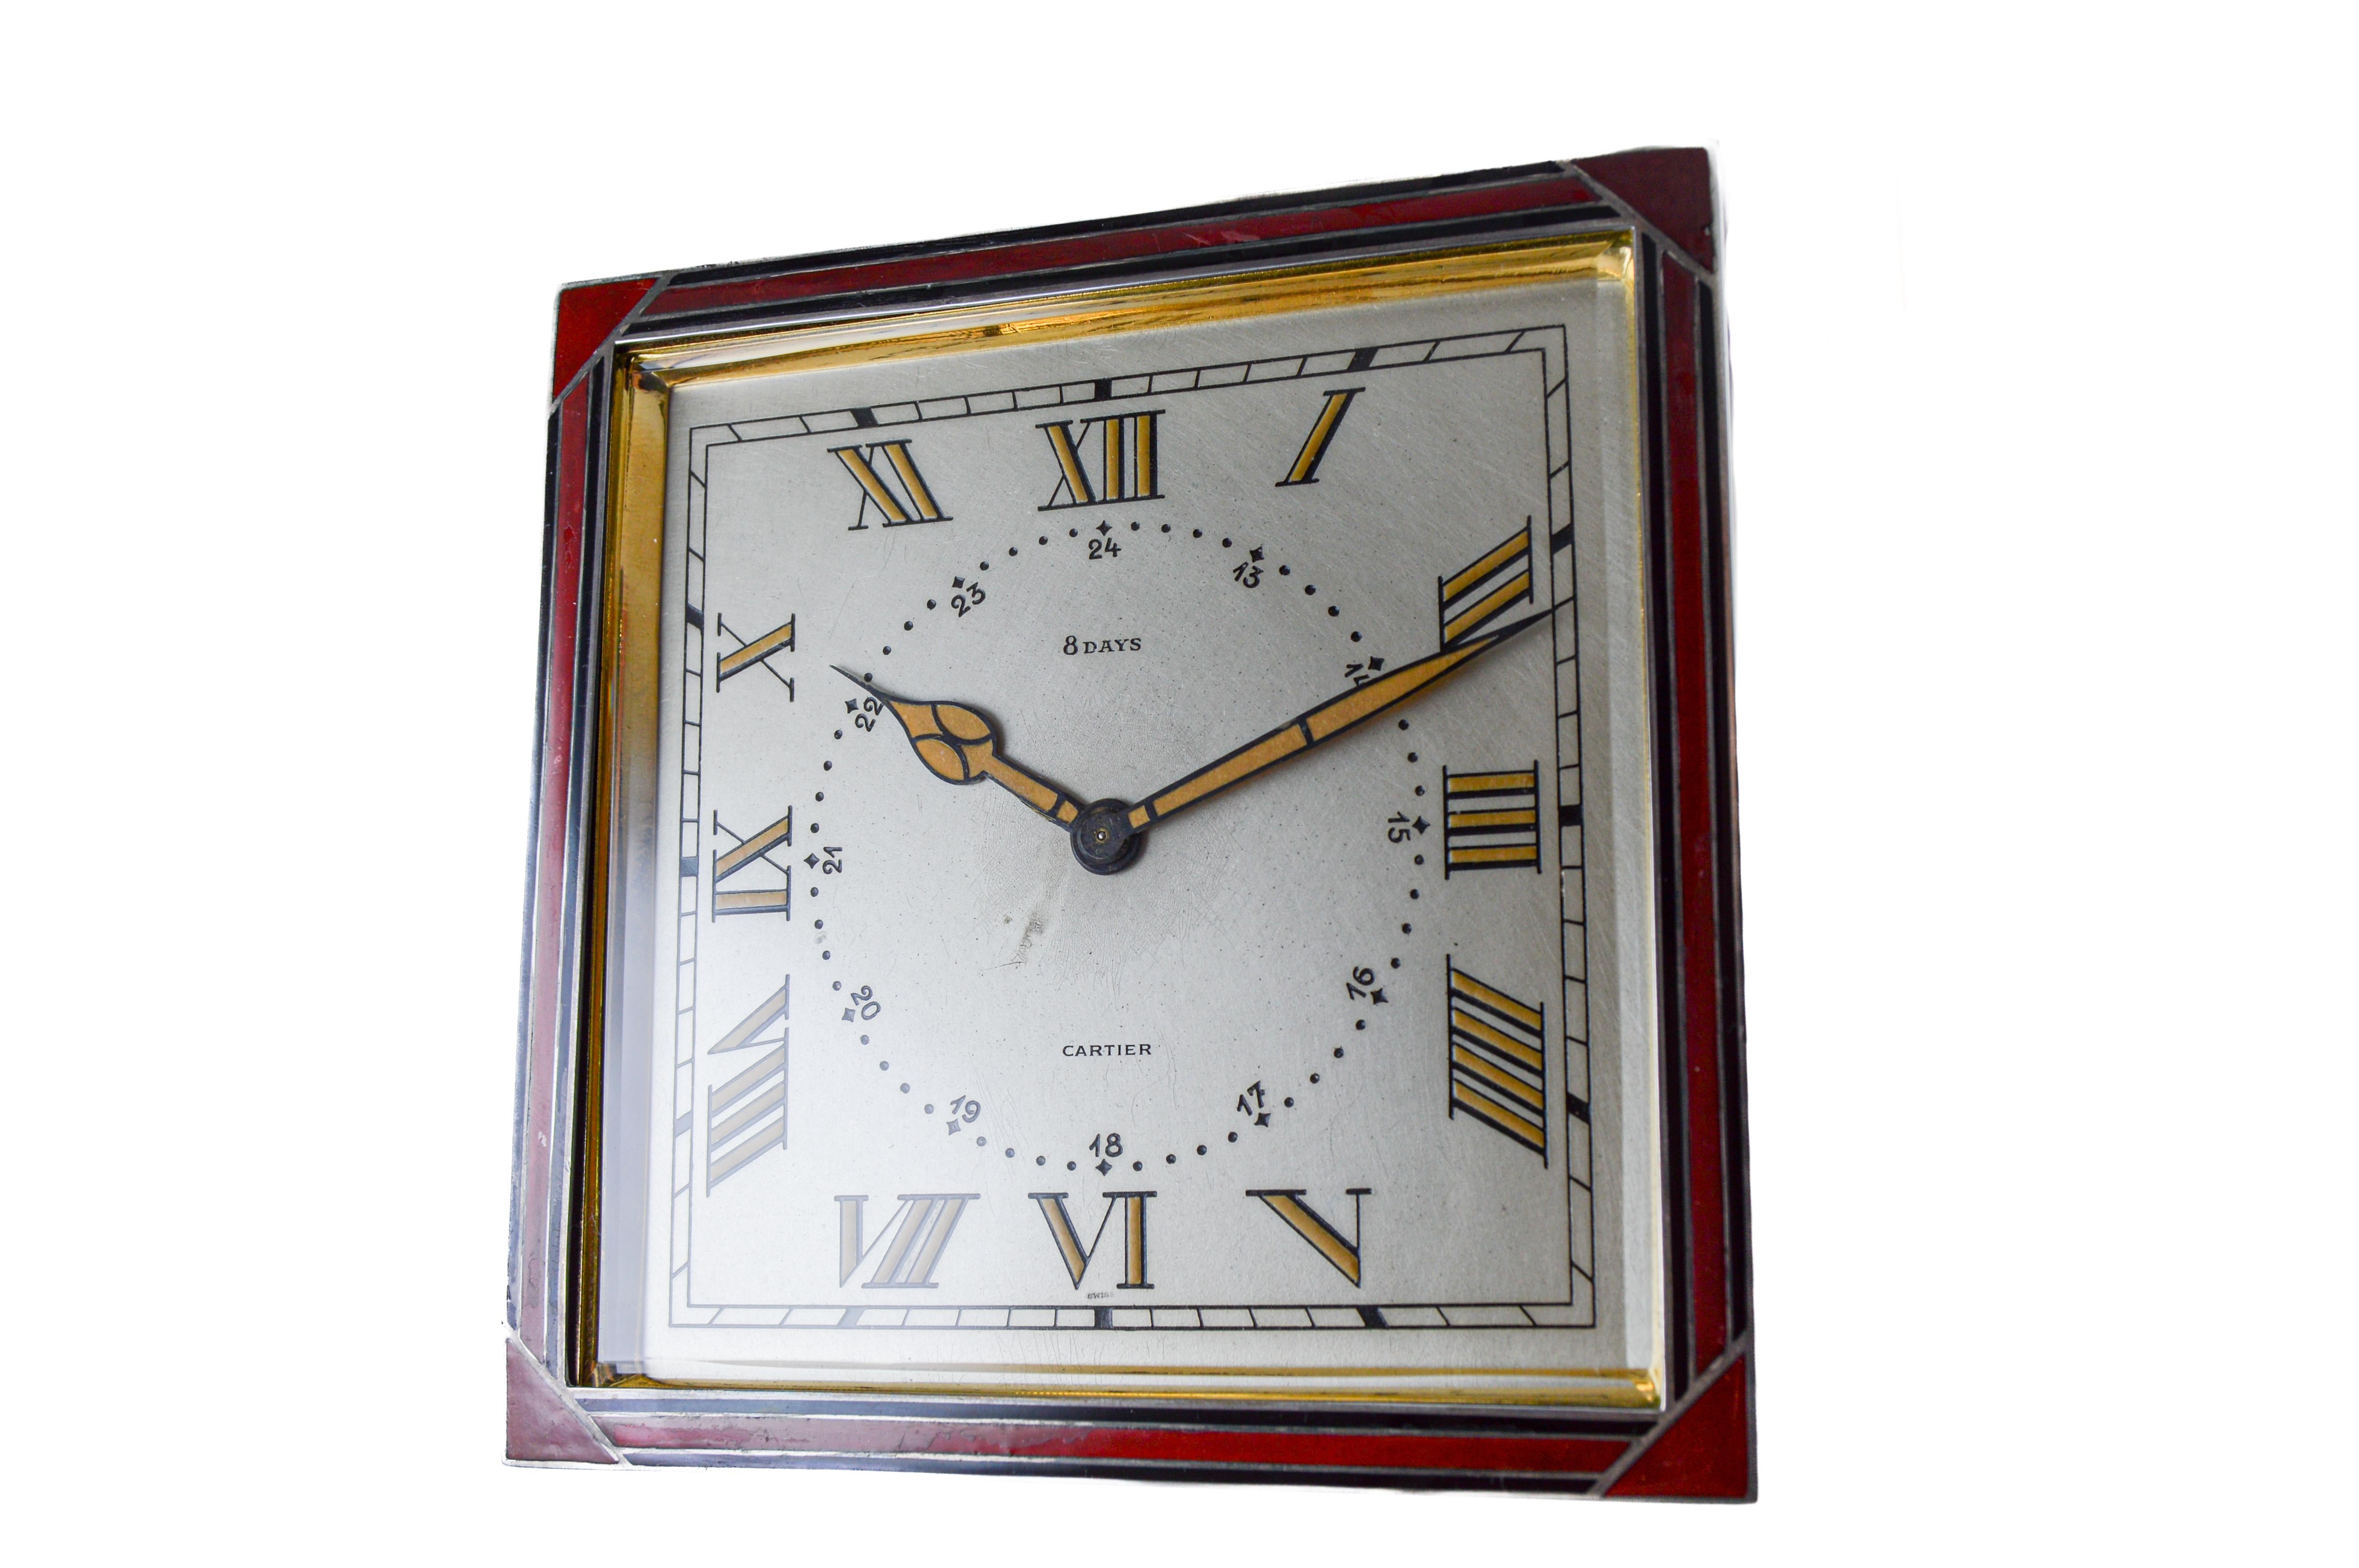 Cartier Sterling and Enamel Art Deco Desk Clock with Breguet Engine Turned Dial For Sale 8